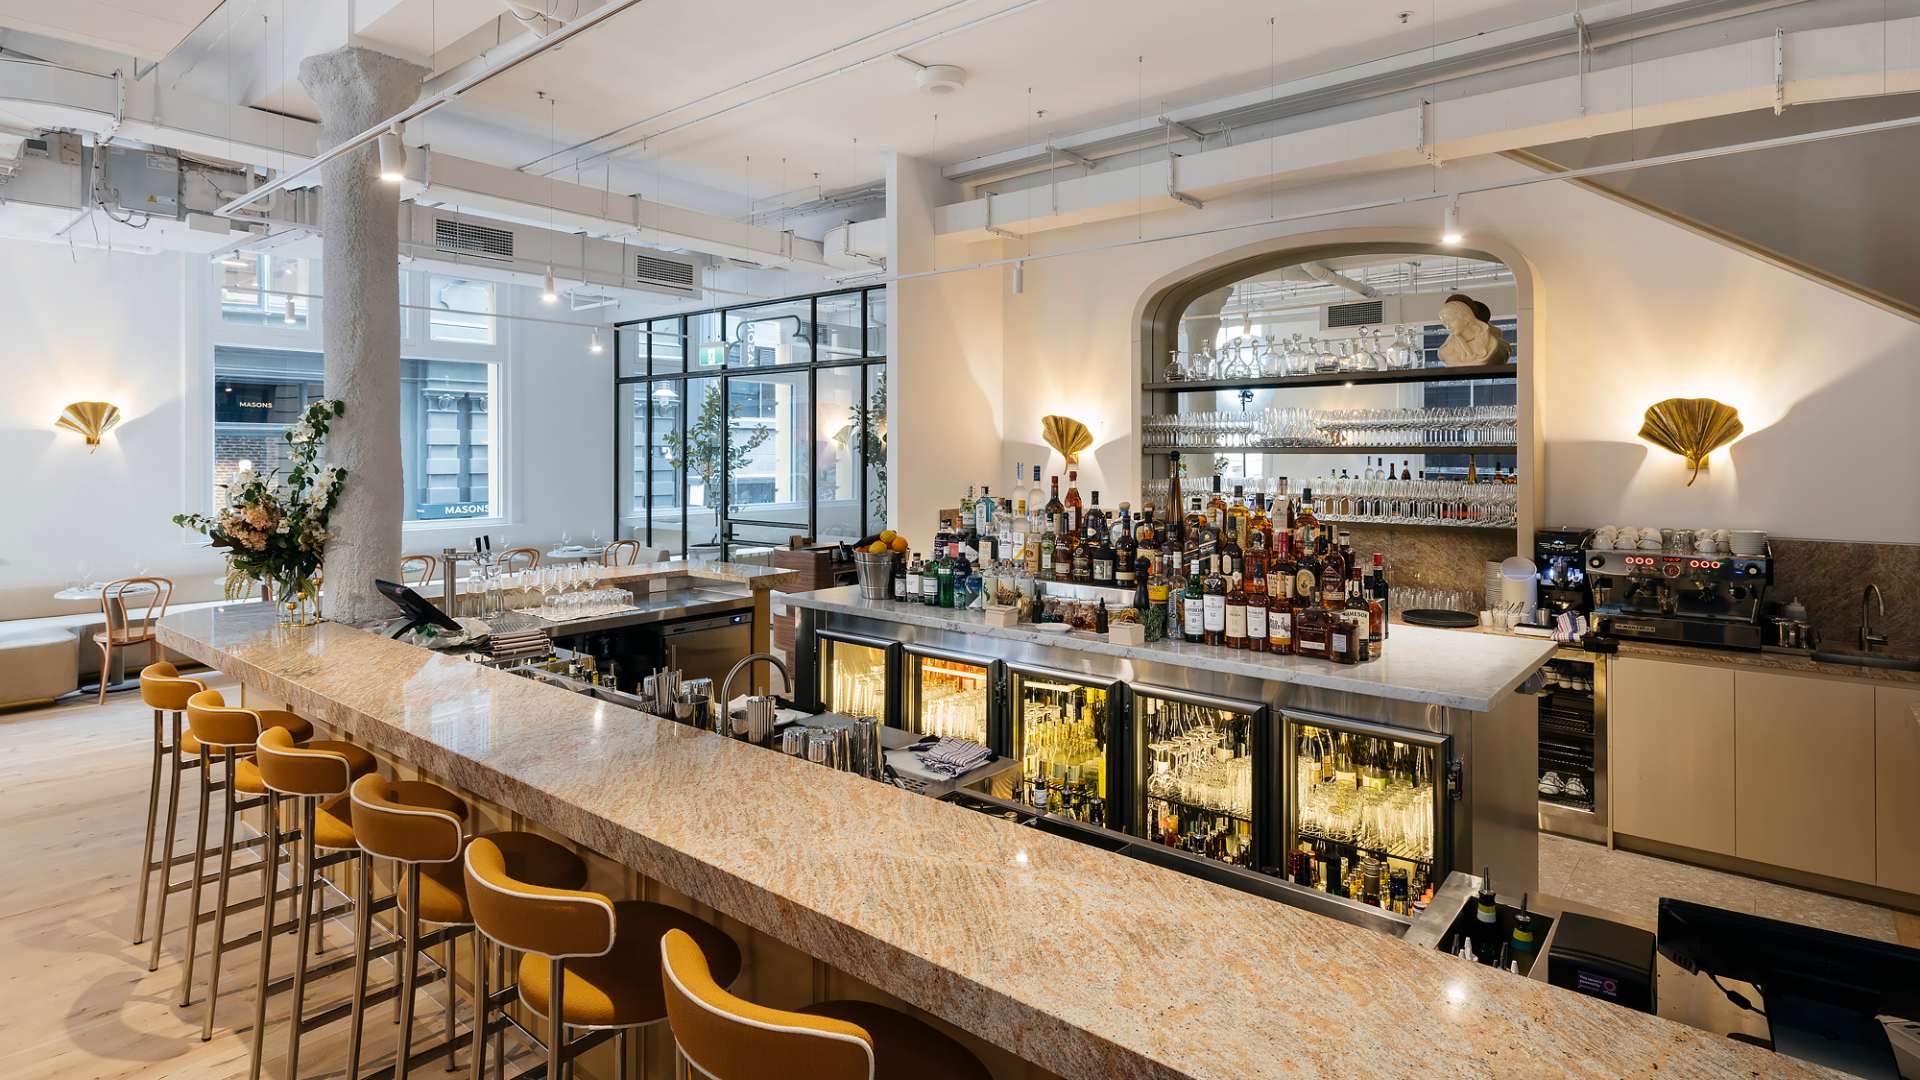 The Mulberry Group's Newest Restaurant Hazel Has Opened Inside a Historic CBD Building